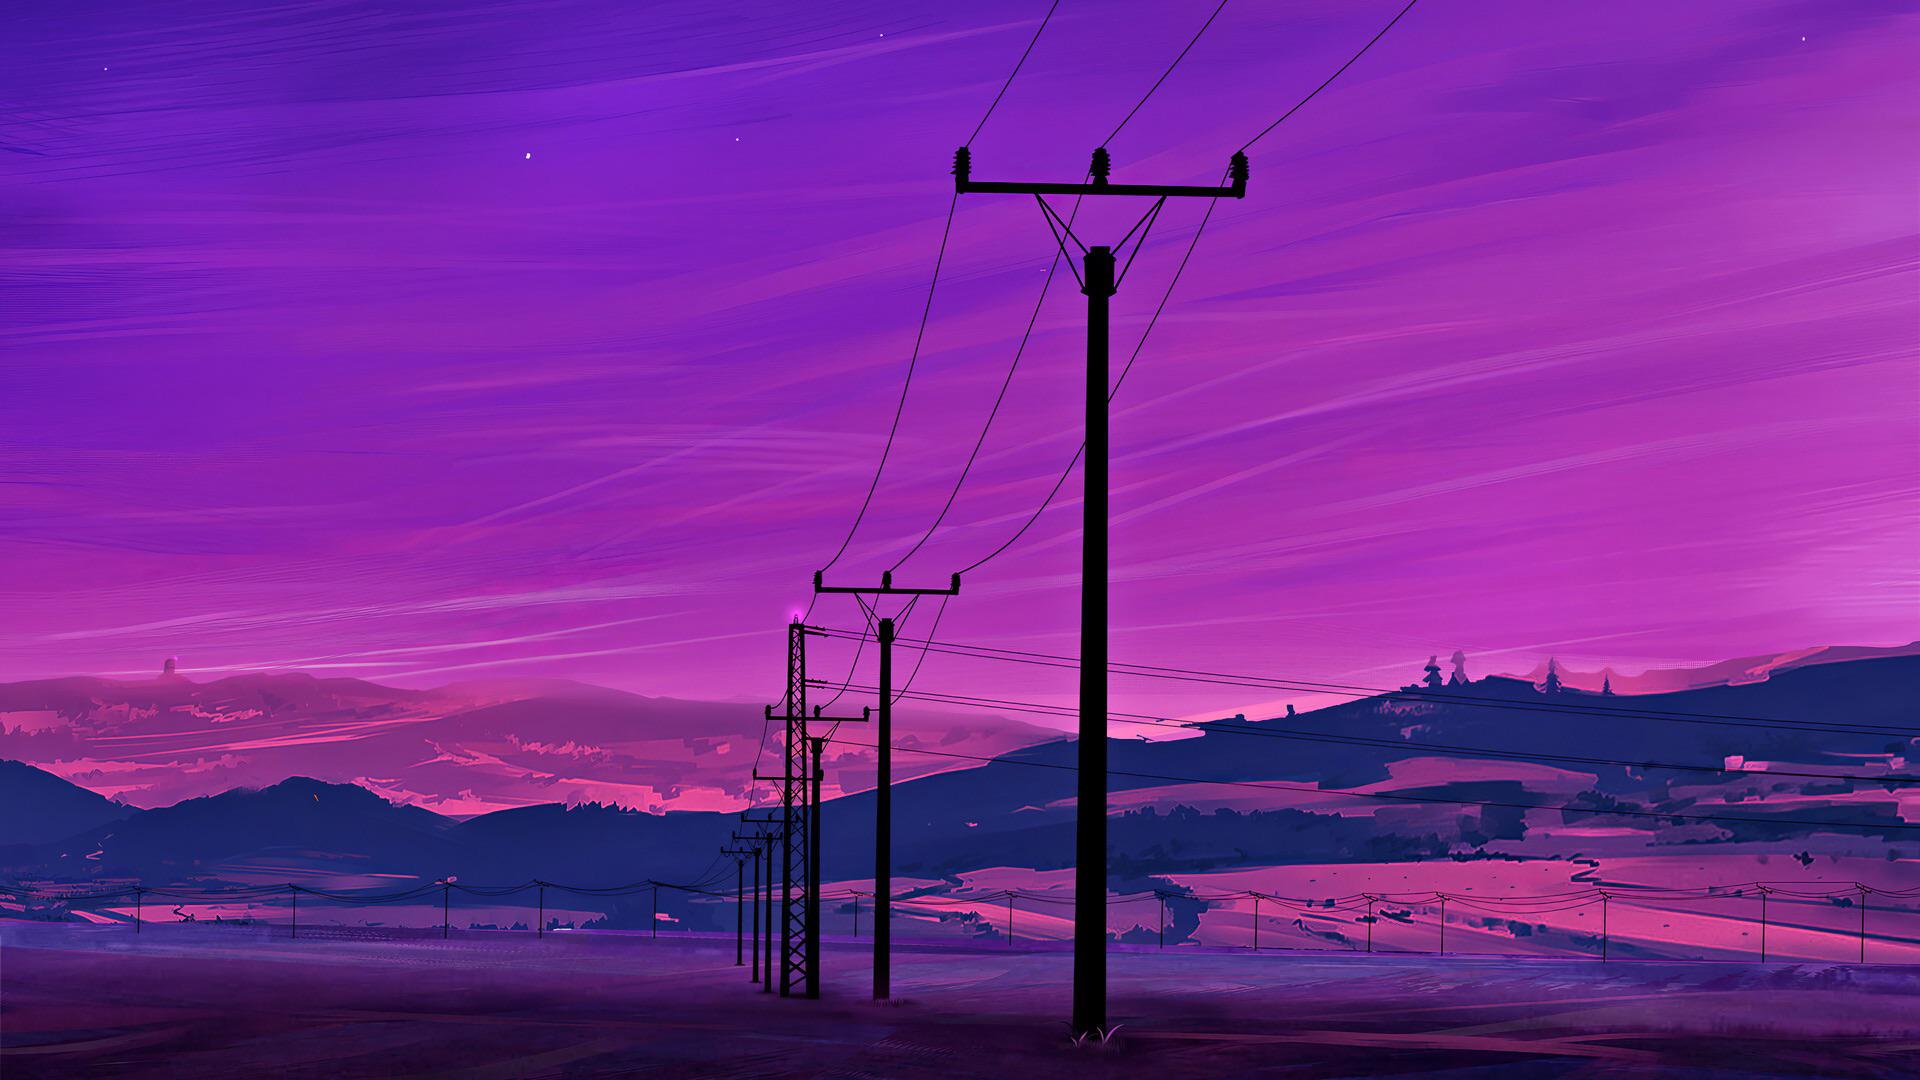 Neon Power Lines by unknown [1920x1080]